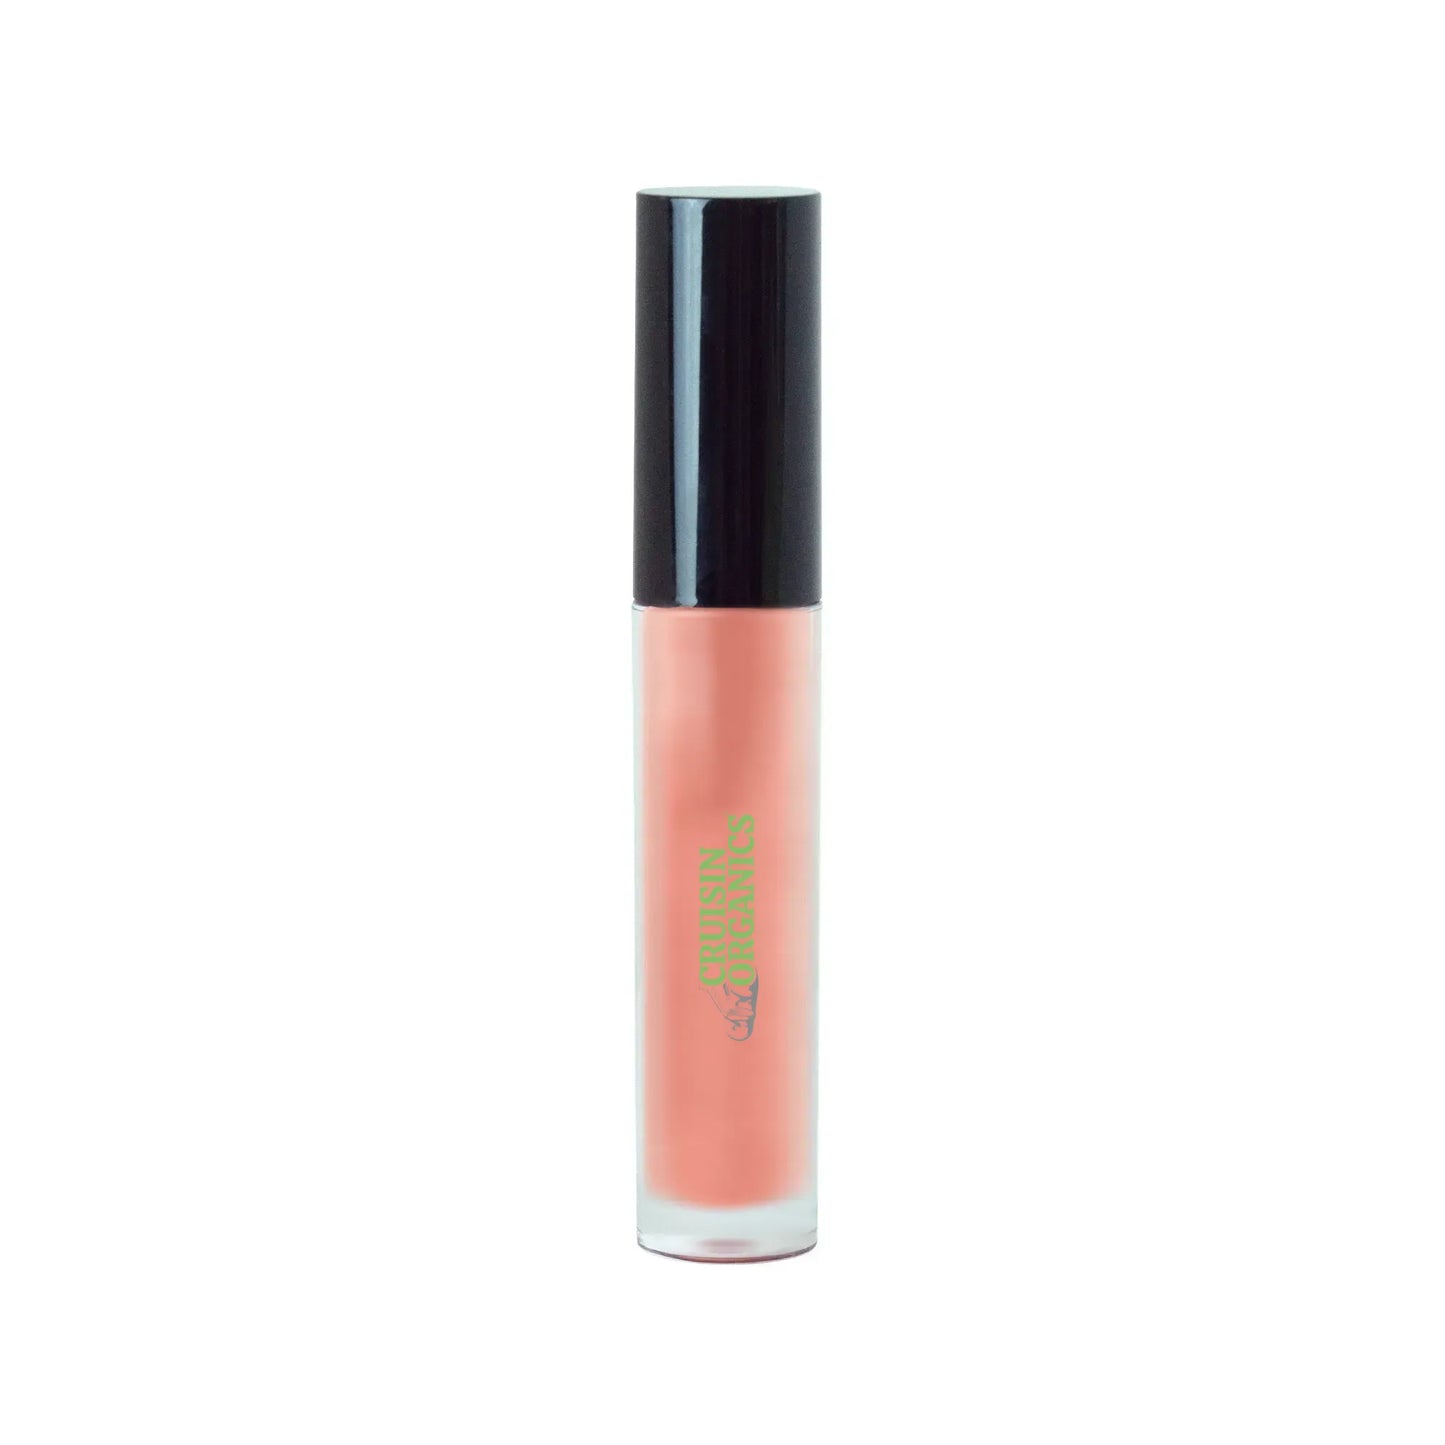 When you travel, bring your gloss with you. convenient TSA dimensions. SPF and liquid shine are features of Cruisin Organics Coral Lip Gloss. Glimmer every day. Purchase now at our online store to provide ladies throughout the Coral Reef with cruzn convenience.